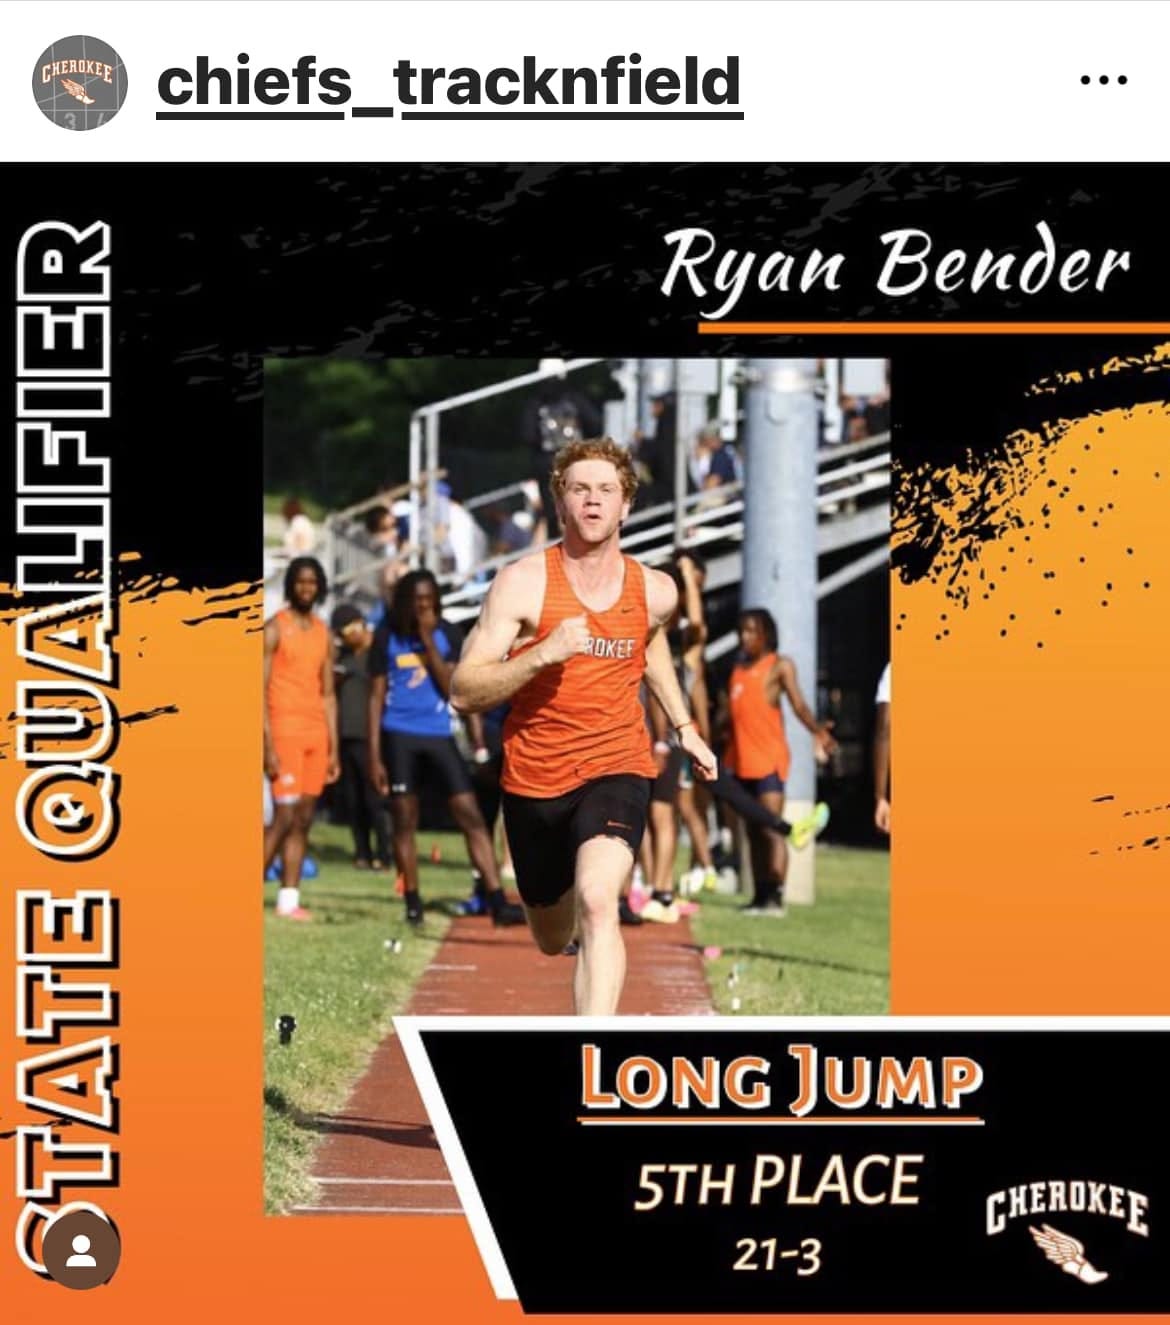 May be an image of 5 people, track and field and text that says '… Ryan Bender CHEHEKKE chiefs_tracknfield chiefs IER () A 。 TAT ROKEF LONG JUMP 5TH PLACE 21-3 CHEROKEE'